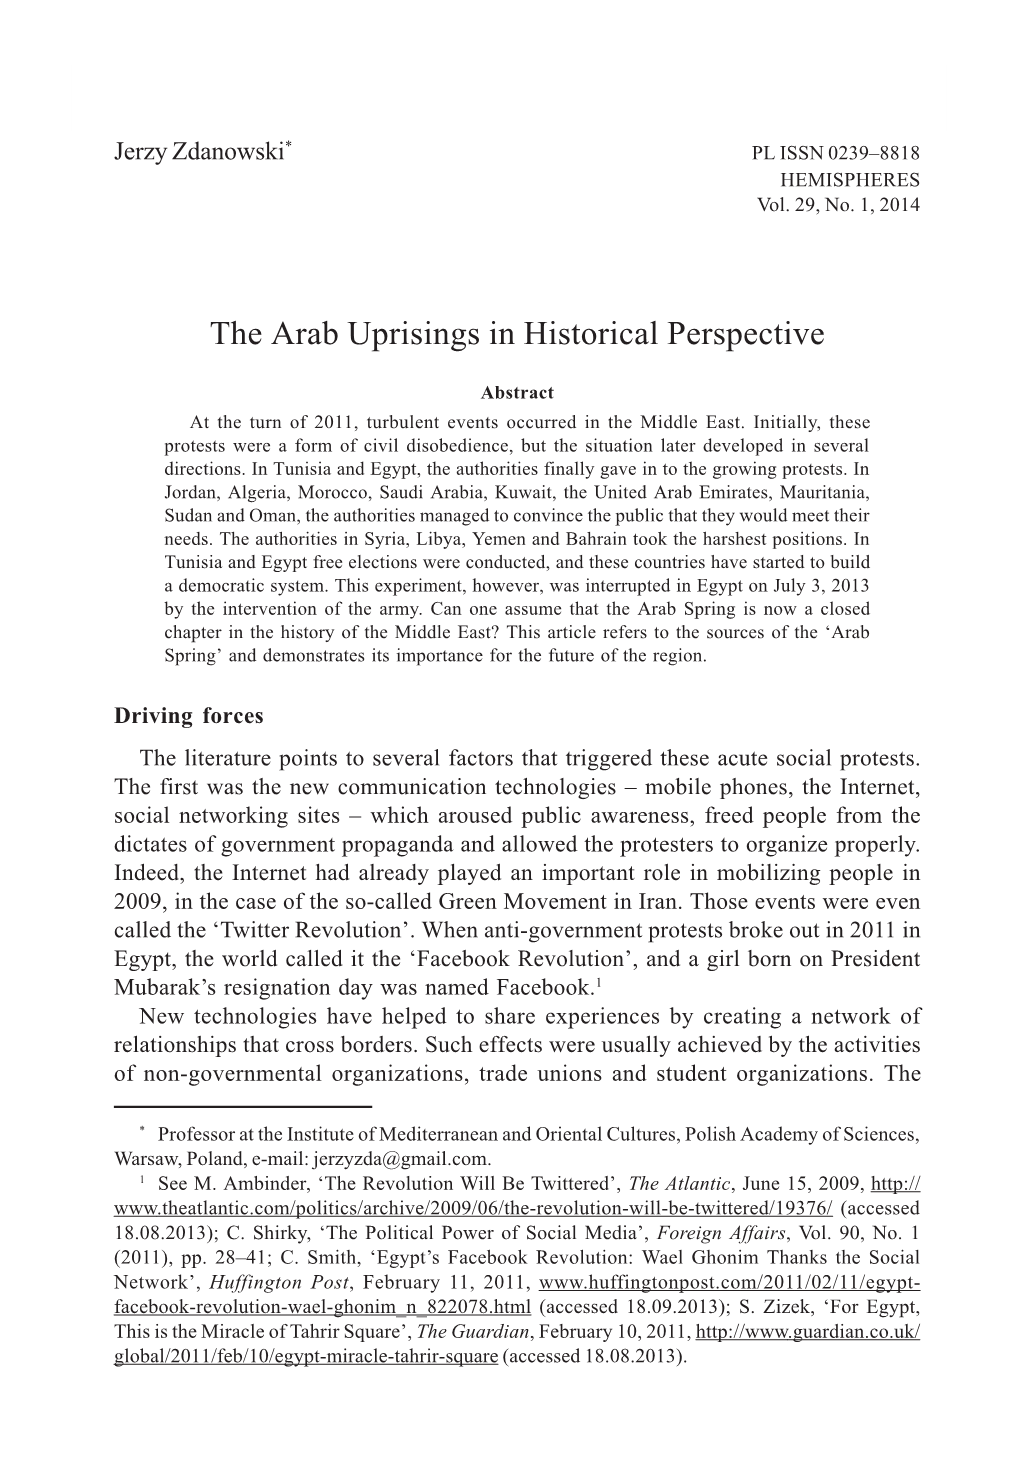 The Arab Uprisings in Historical Perspective 79